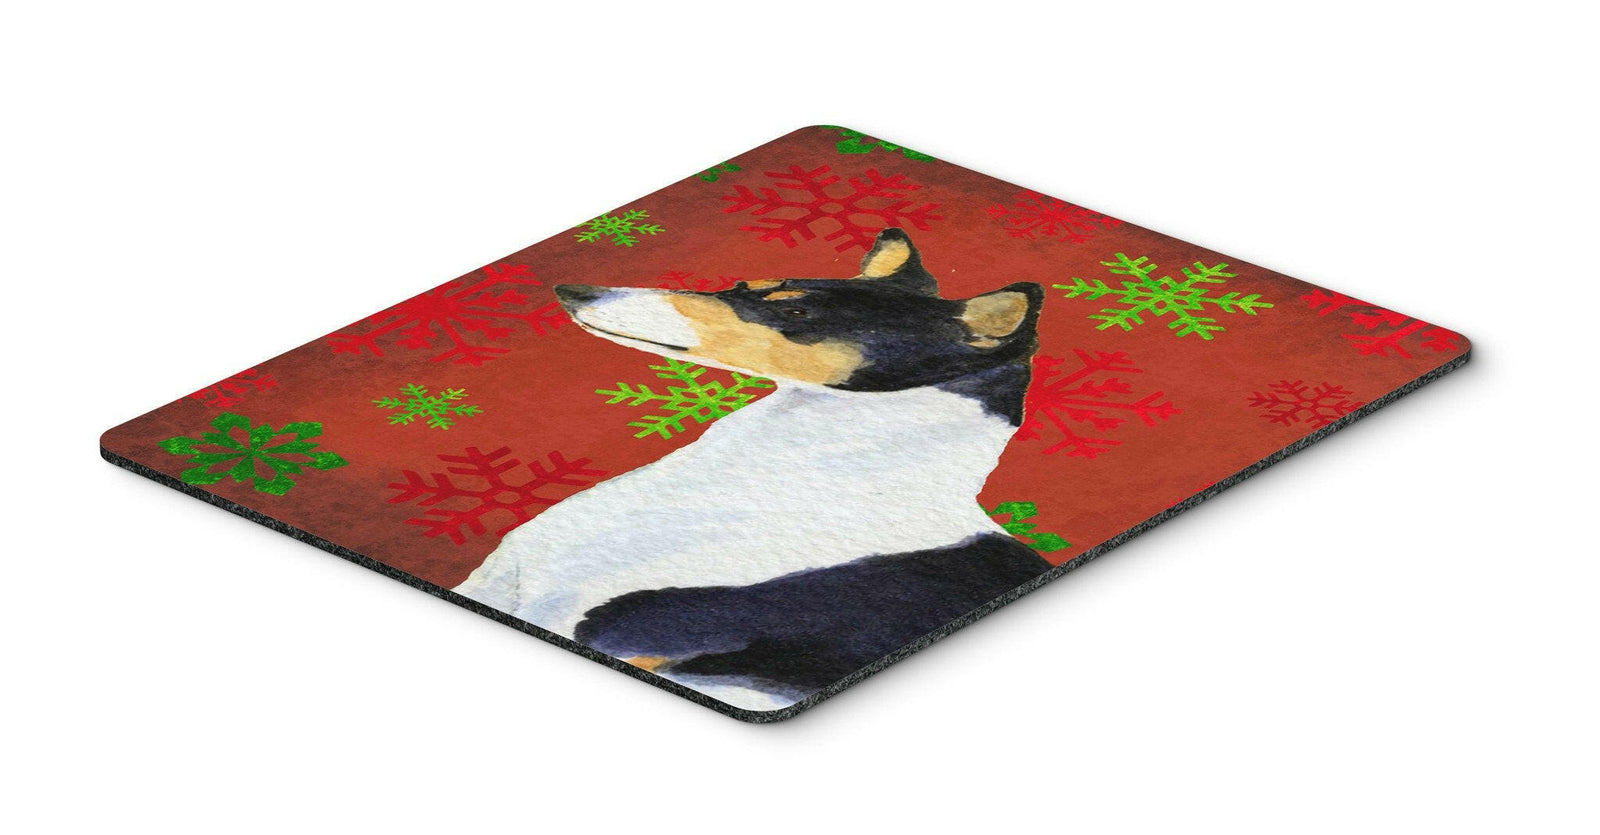 Basenji Red and Green Snowflakes Holiday Christmas Mouse Pad, Hot Pad or Trivet by Caroline's Treasures